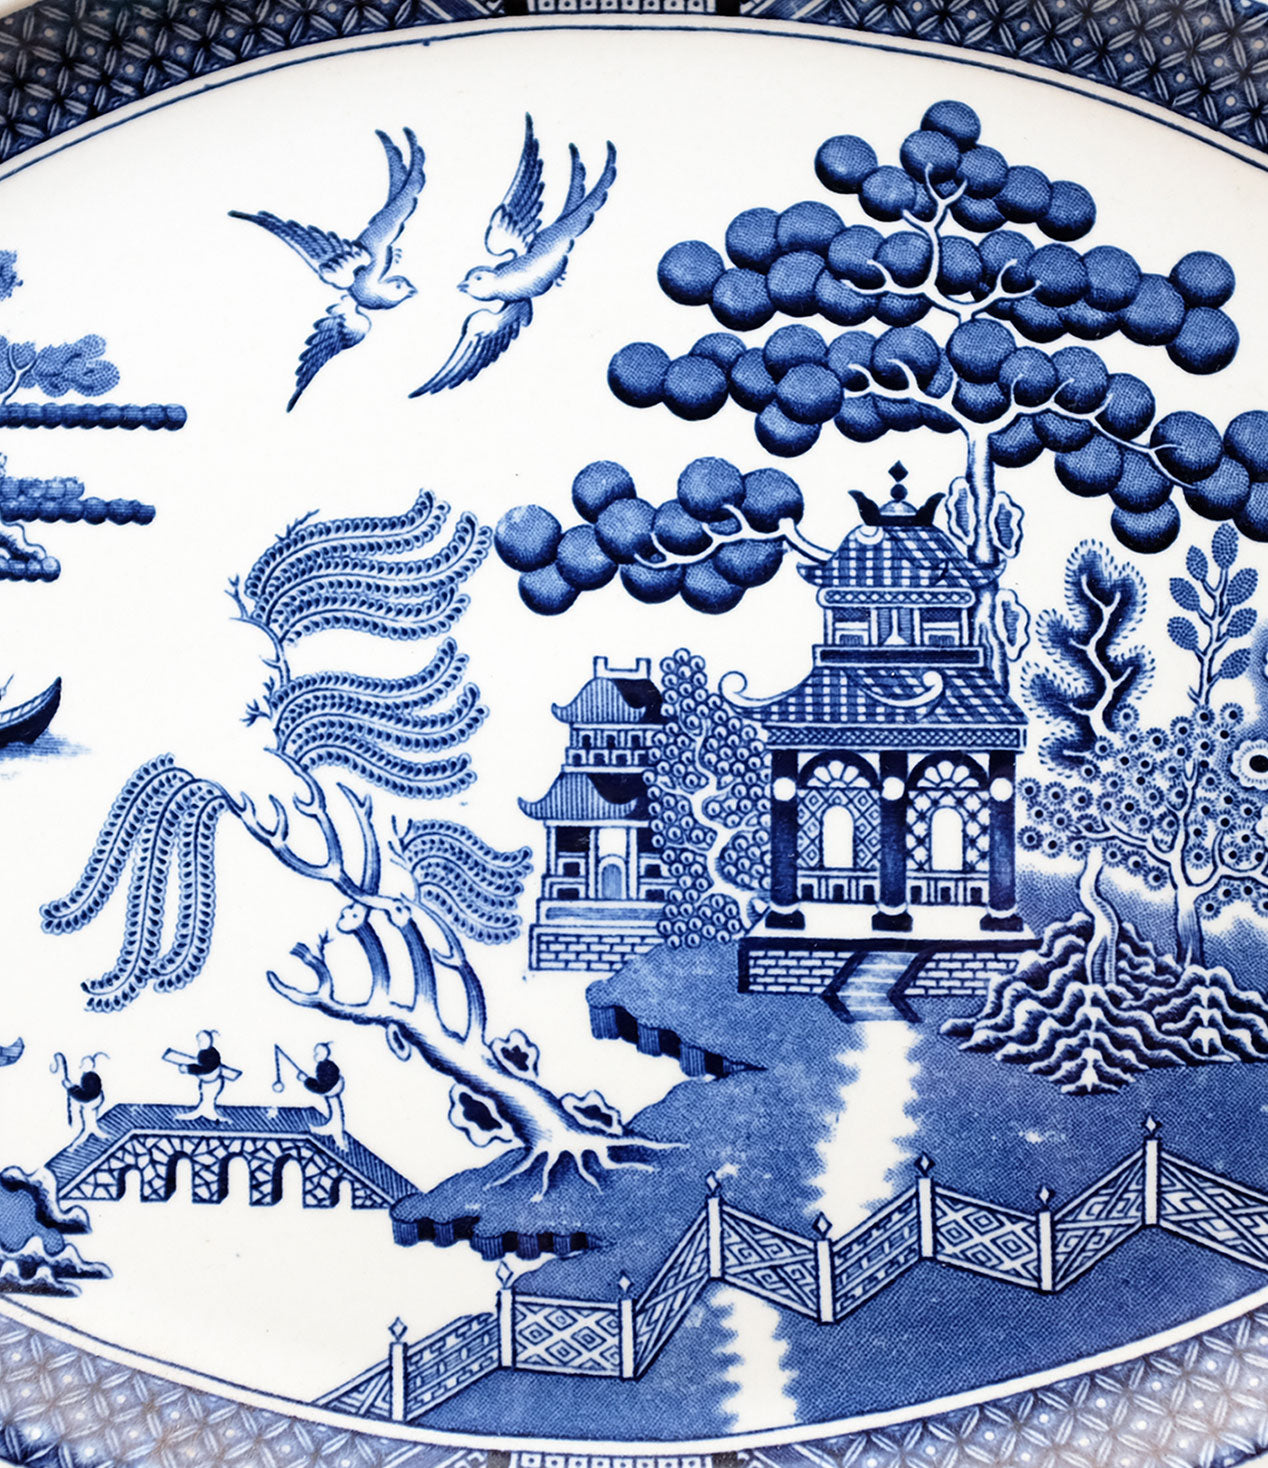 Porcelain: From Chinoiserie to Brown Betty